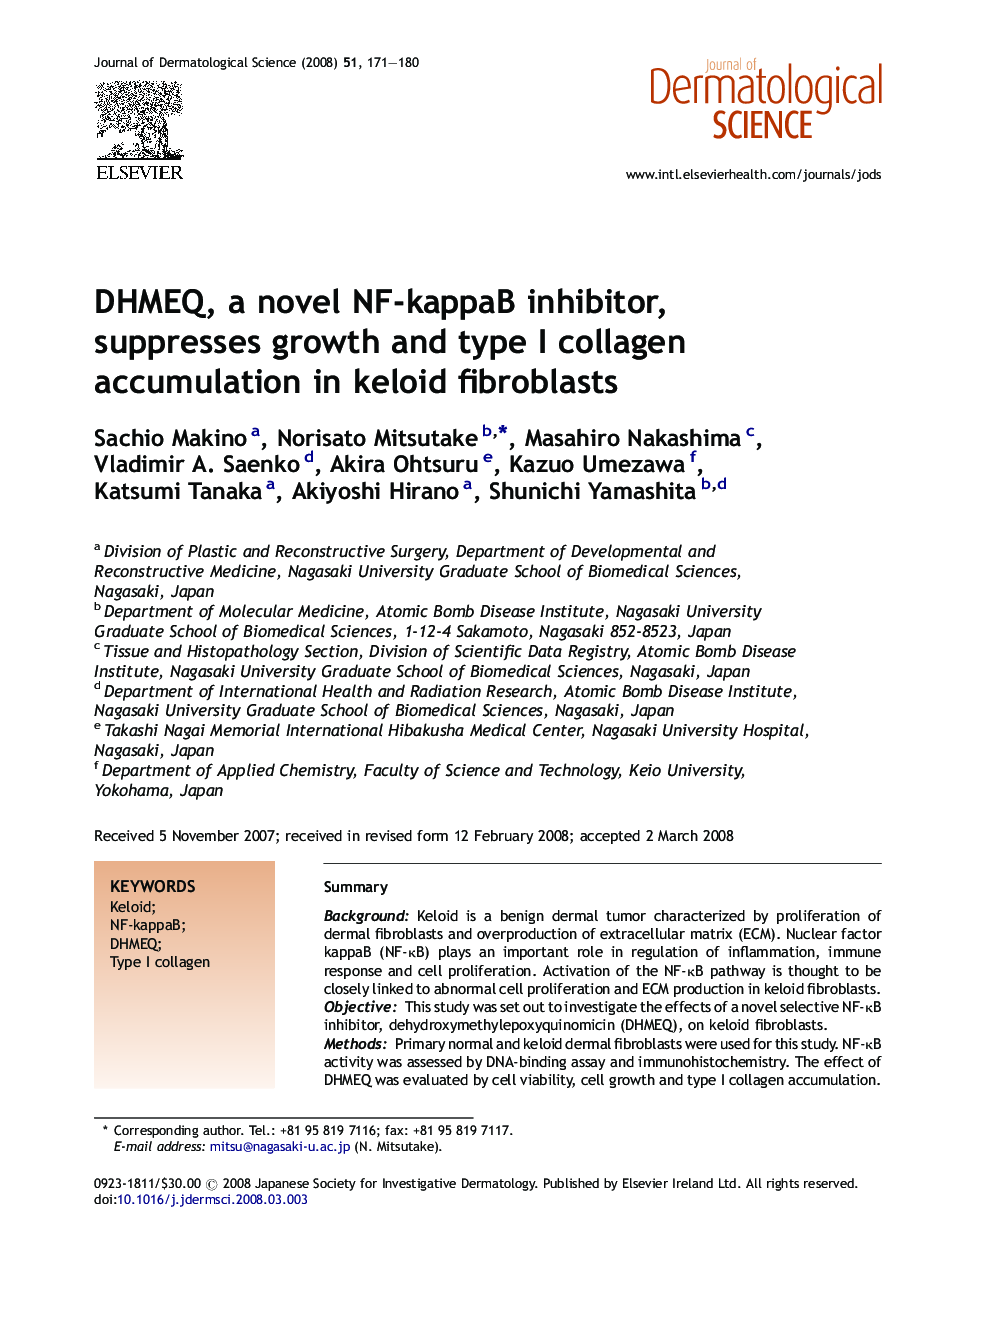 DHMEQ, a novel NF-kappaB inhibitor, suppresses growth and type I collagen accumulation in keloid fibroblasts